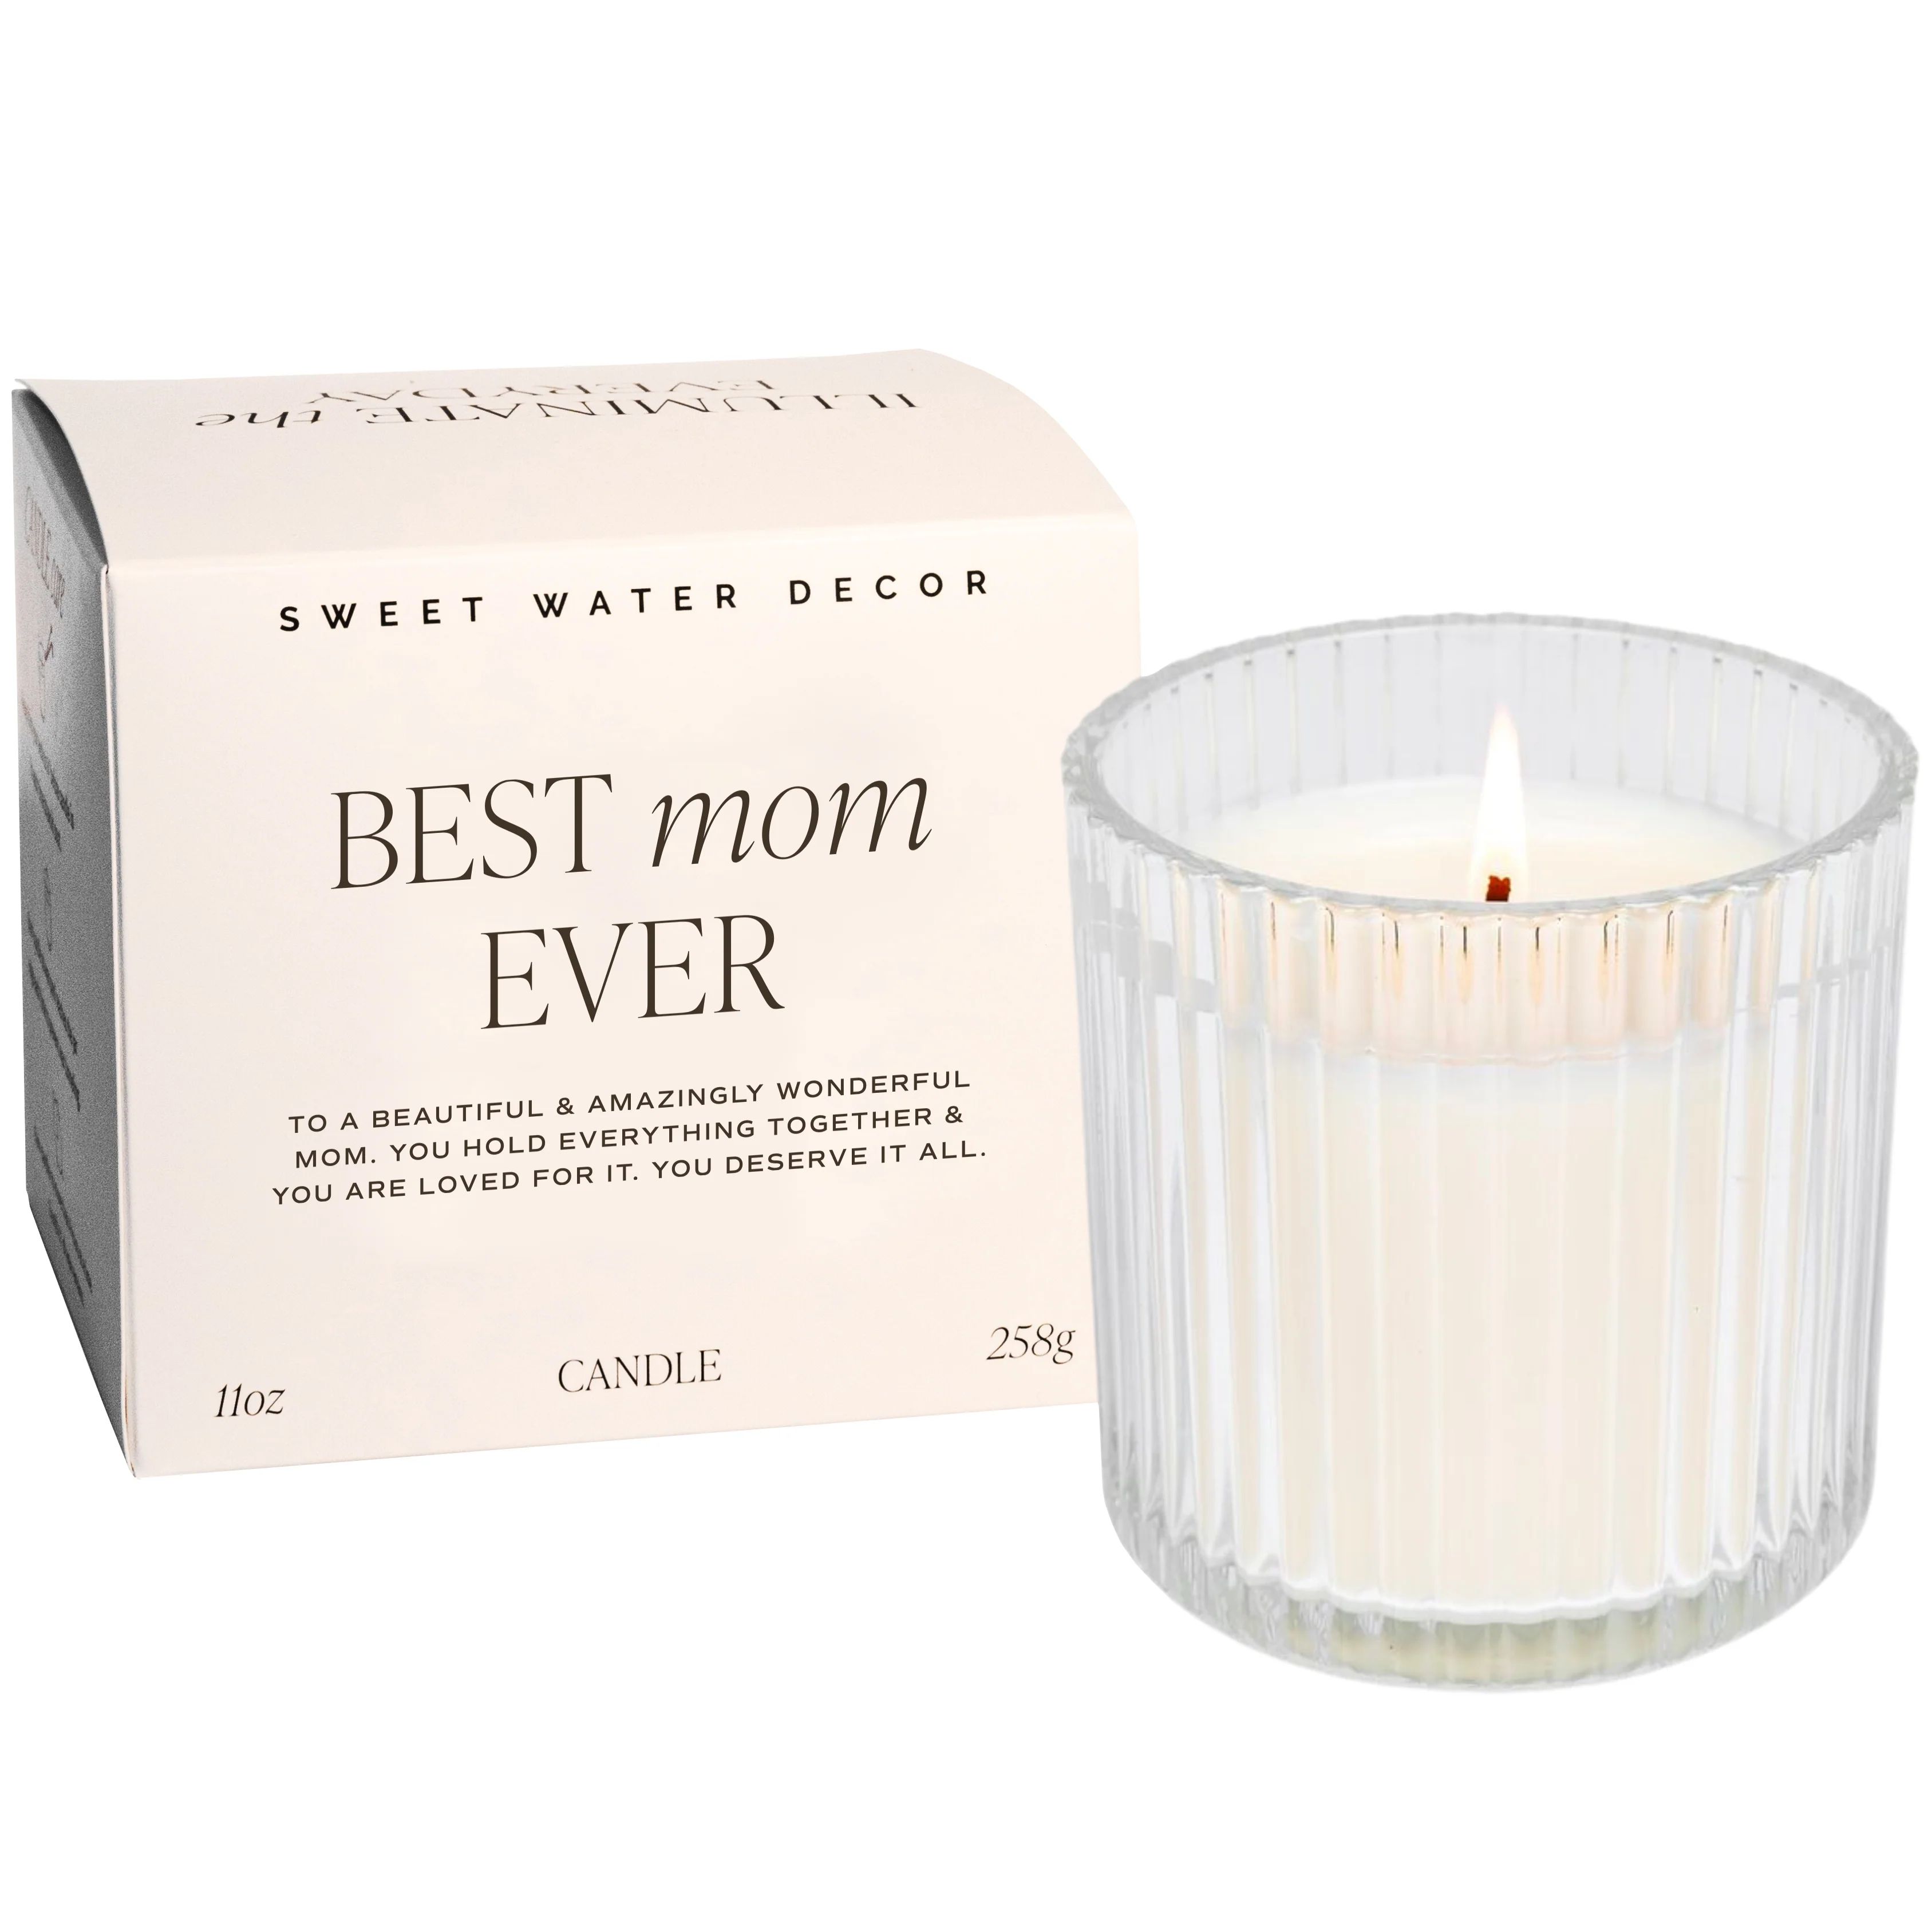 Best Mom Ever Soy Candle - Ribbed Glass Jar with Box - 11 oz | Sweet Water Decor, LLC